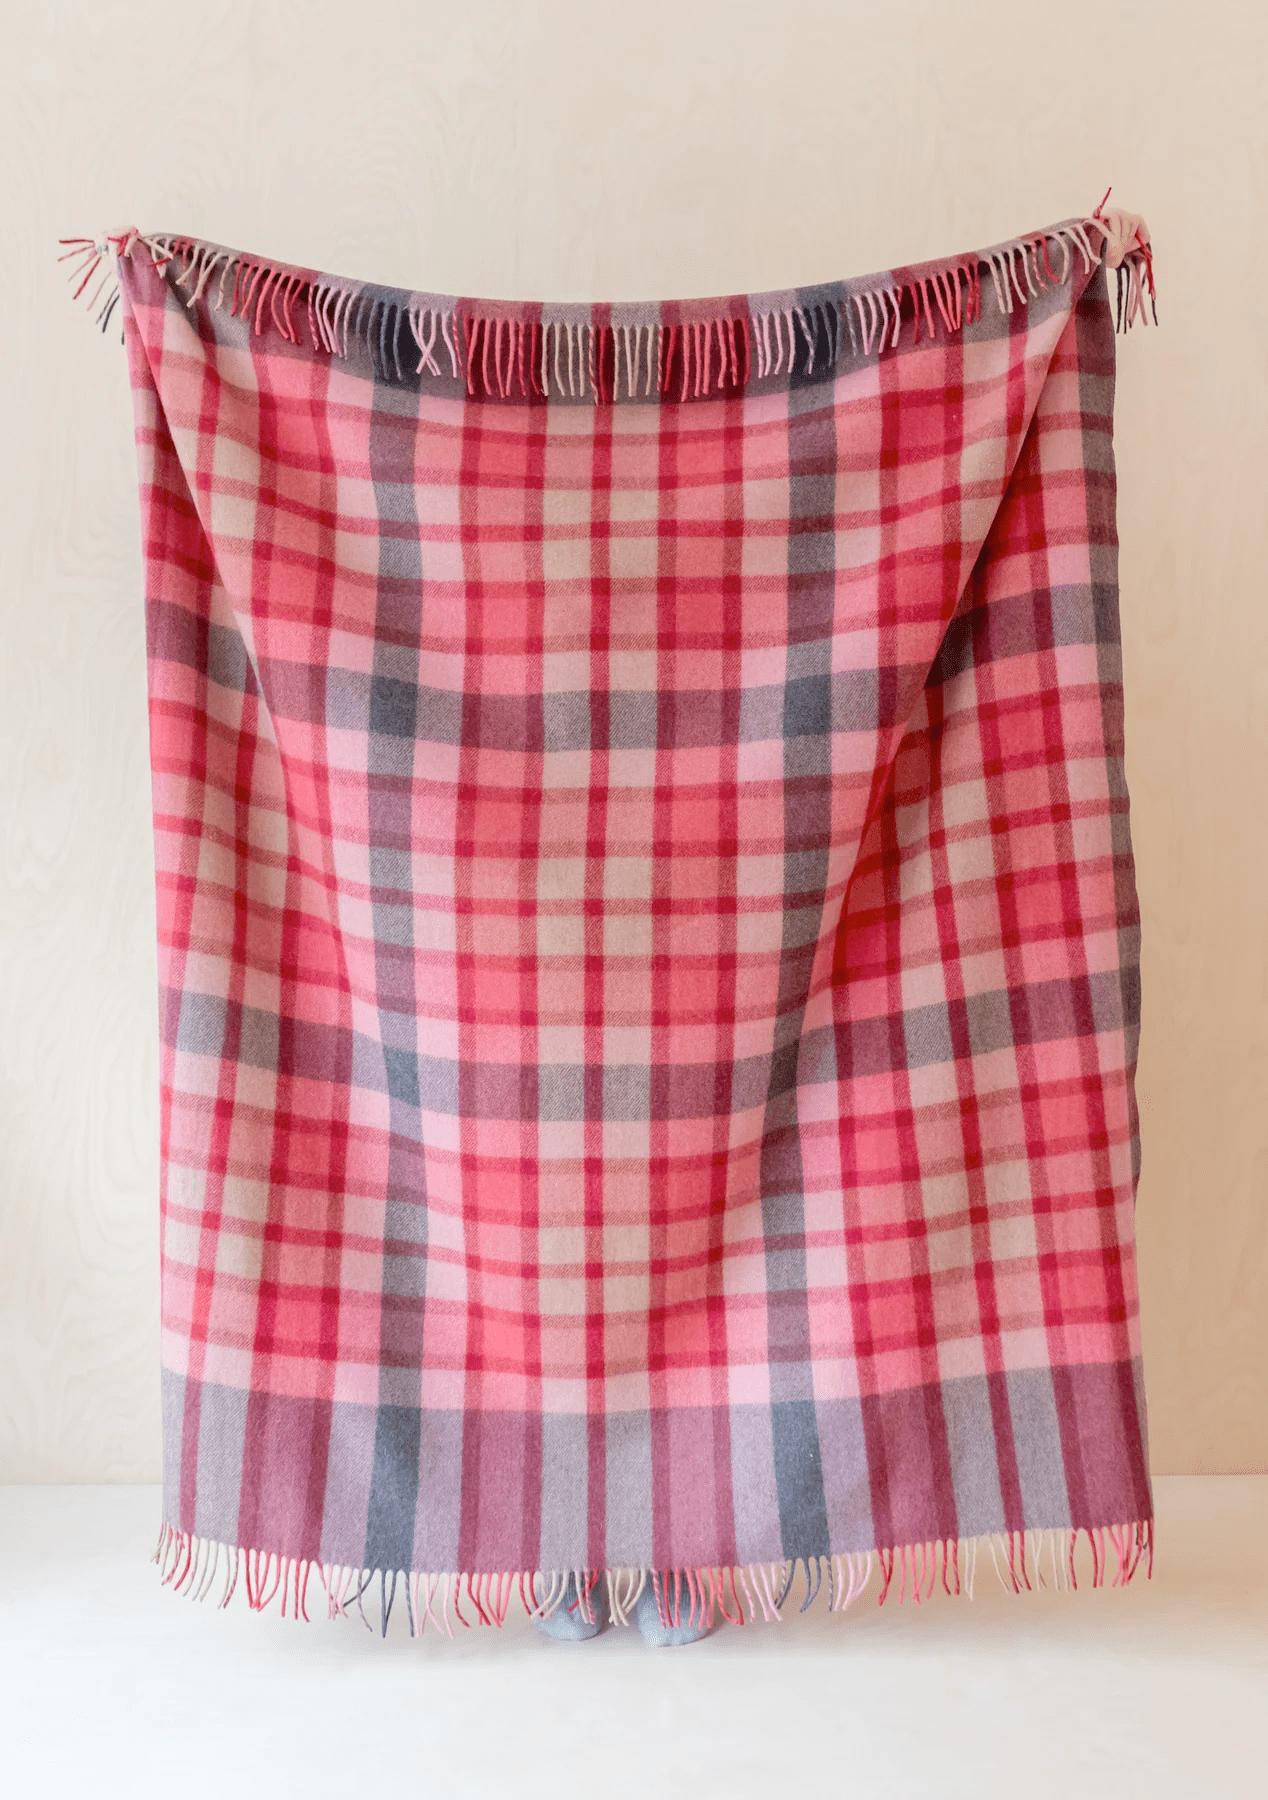 Recycled Wool Blanket in Berry Gingham Check - The Bristol Artisan Handmade Sustainable Gifts and Homewares.